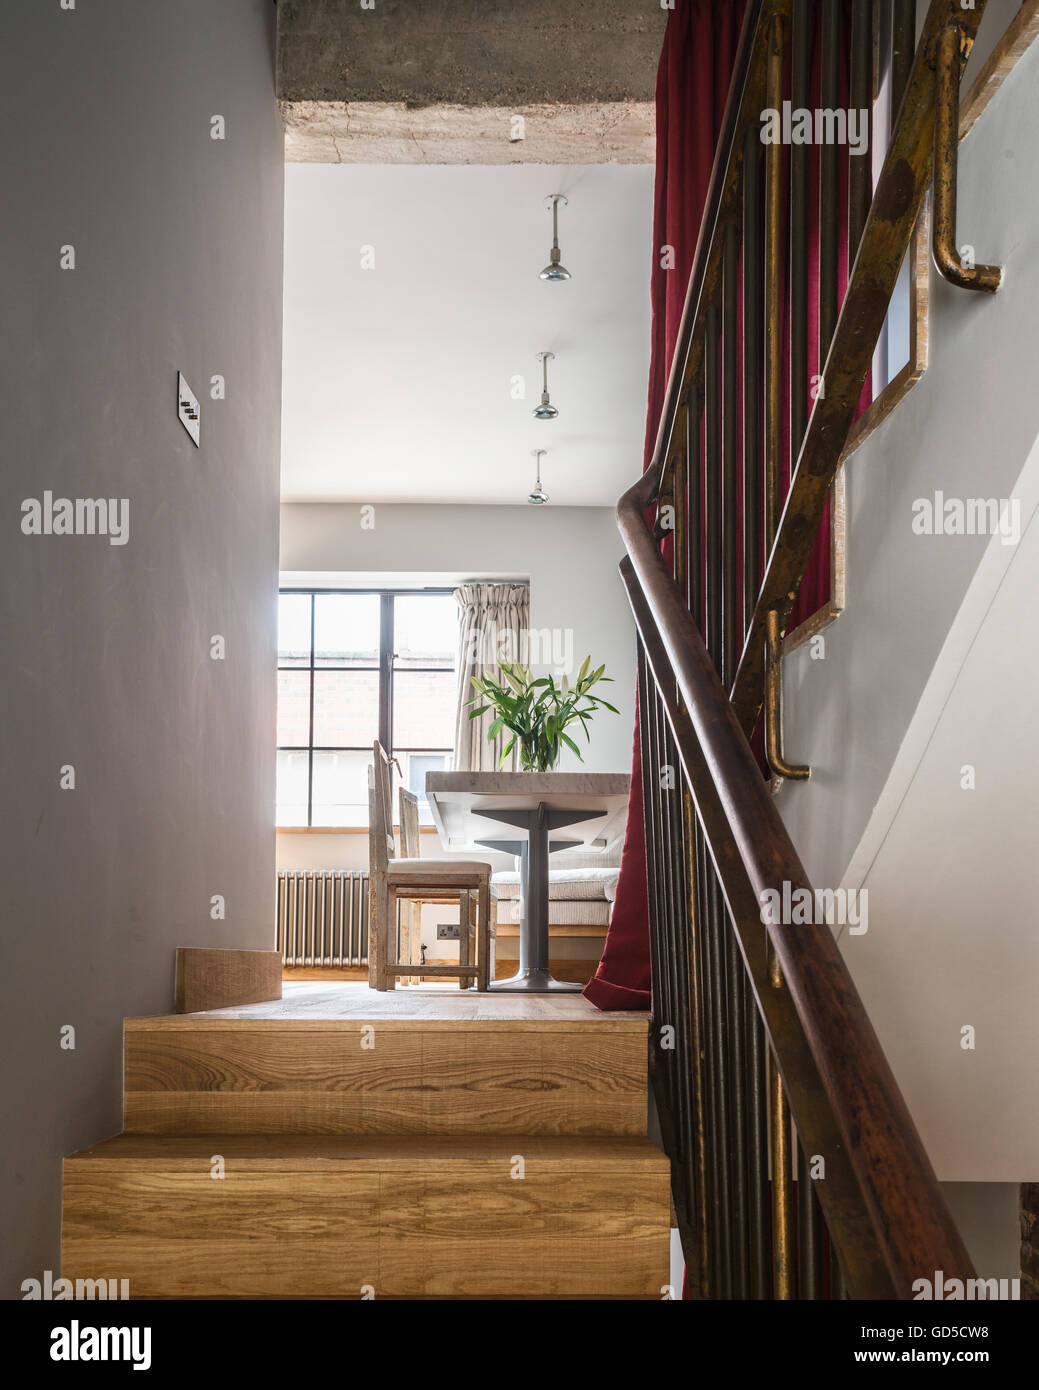 Oak floored staircase leading up to open plan kitchen dining area Stock Photo